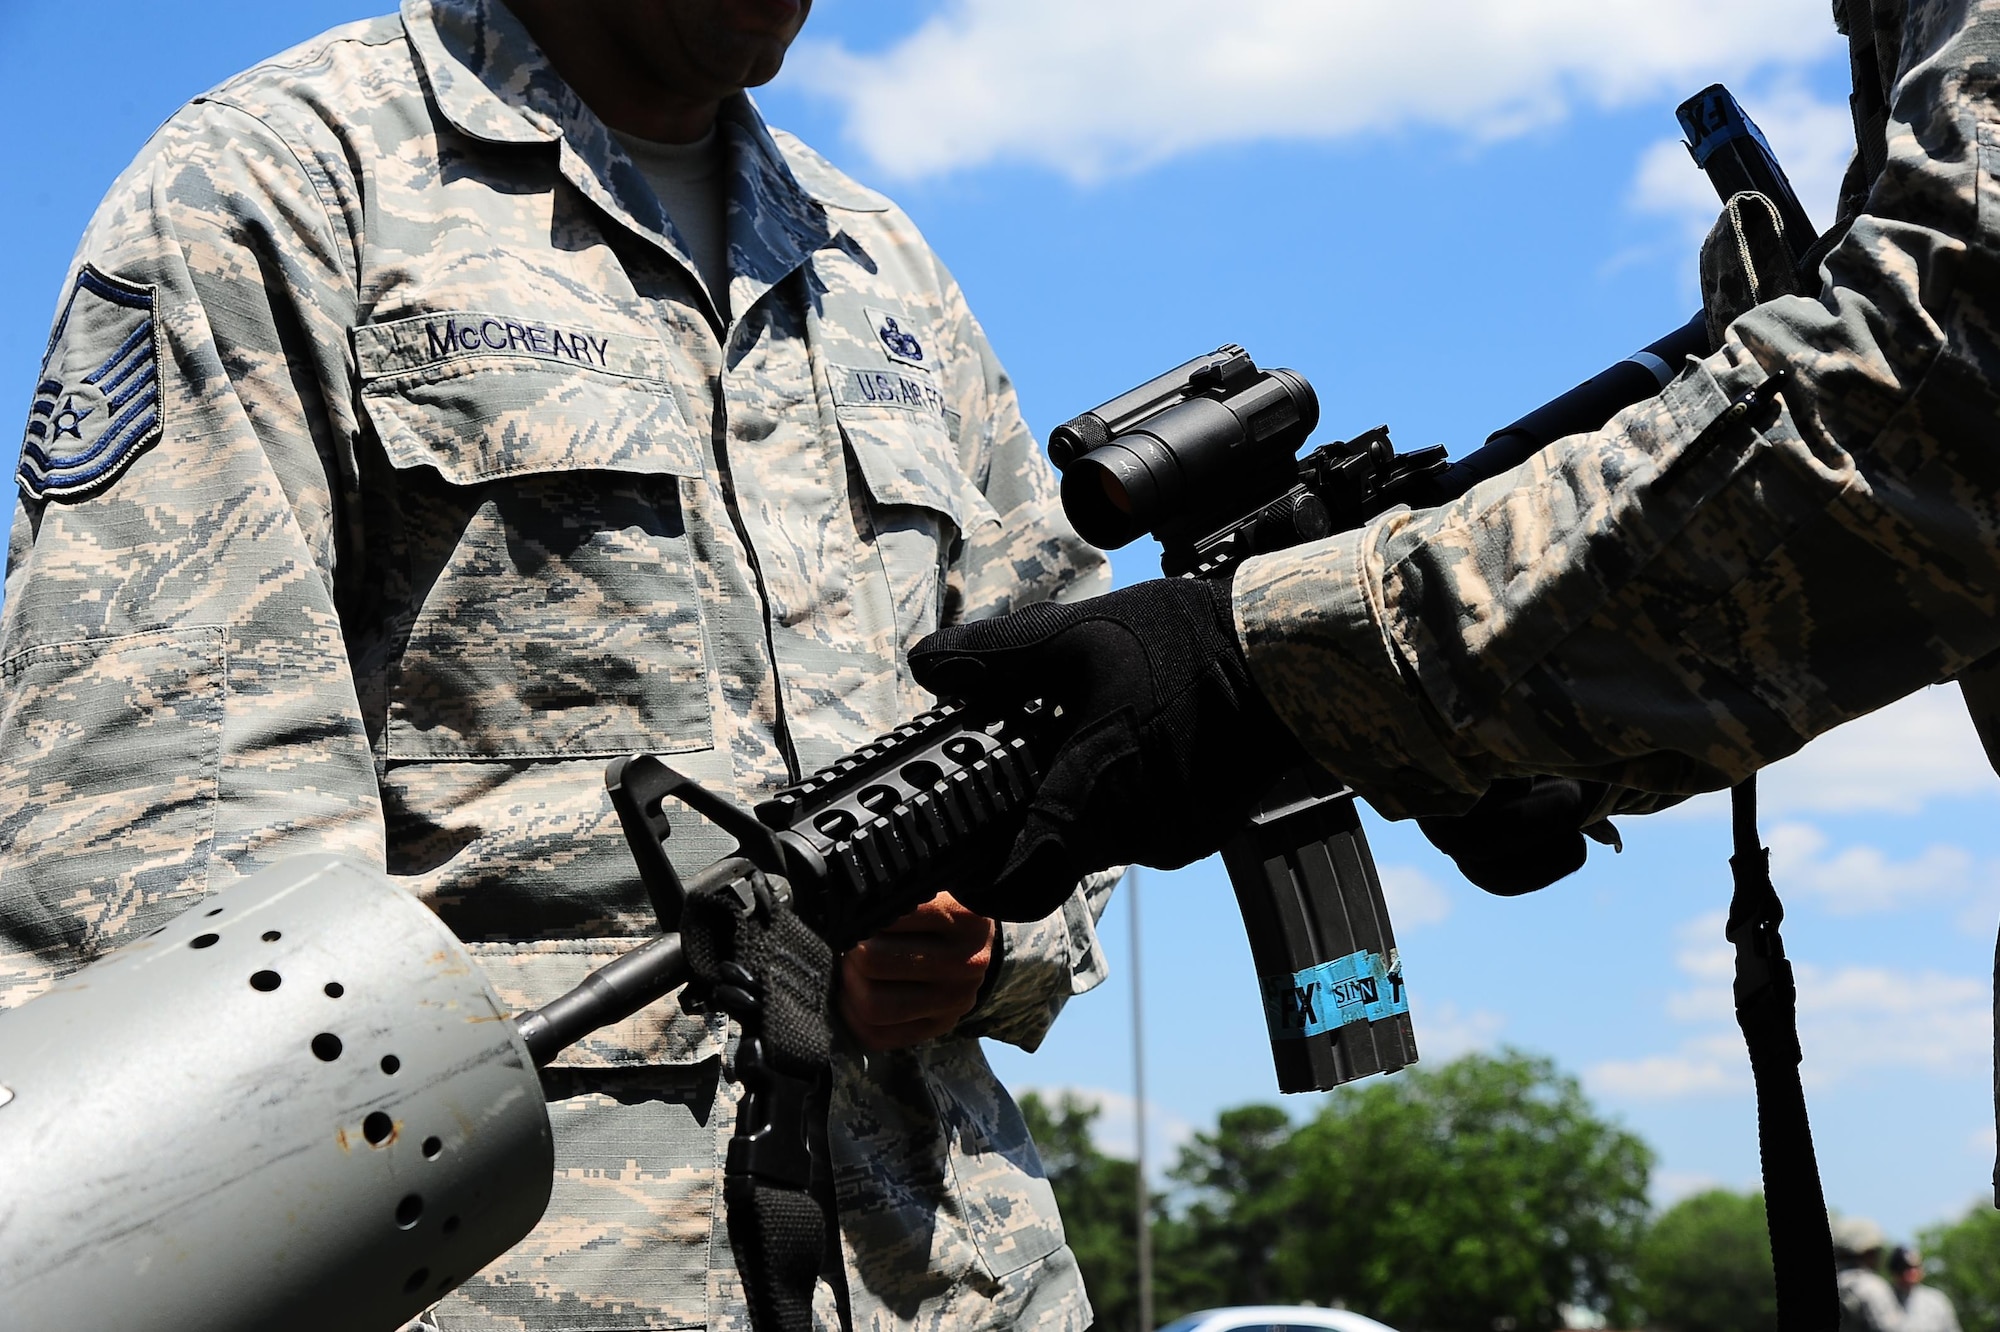 Master Sgt. Jeffery McCreary, 14th Security Forces Squadron Superintendent of Installation Security, observes Airman Lucas McWhorter, 14th SFS Installation Entry Controller, as he clears his weapon May 16, 2017, at Columbus Air Force Base, Mississippi. Defenders are trained on weapon safety and handling  and are permitted to carry weapons on base while on duty. (U.S. Air Force photo by Airman 1st Class Beaux Hebert)